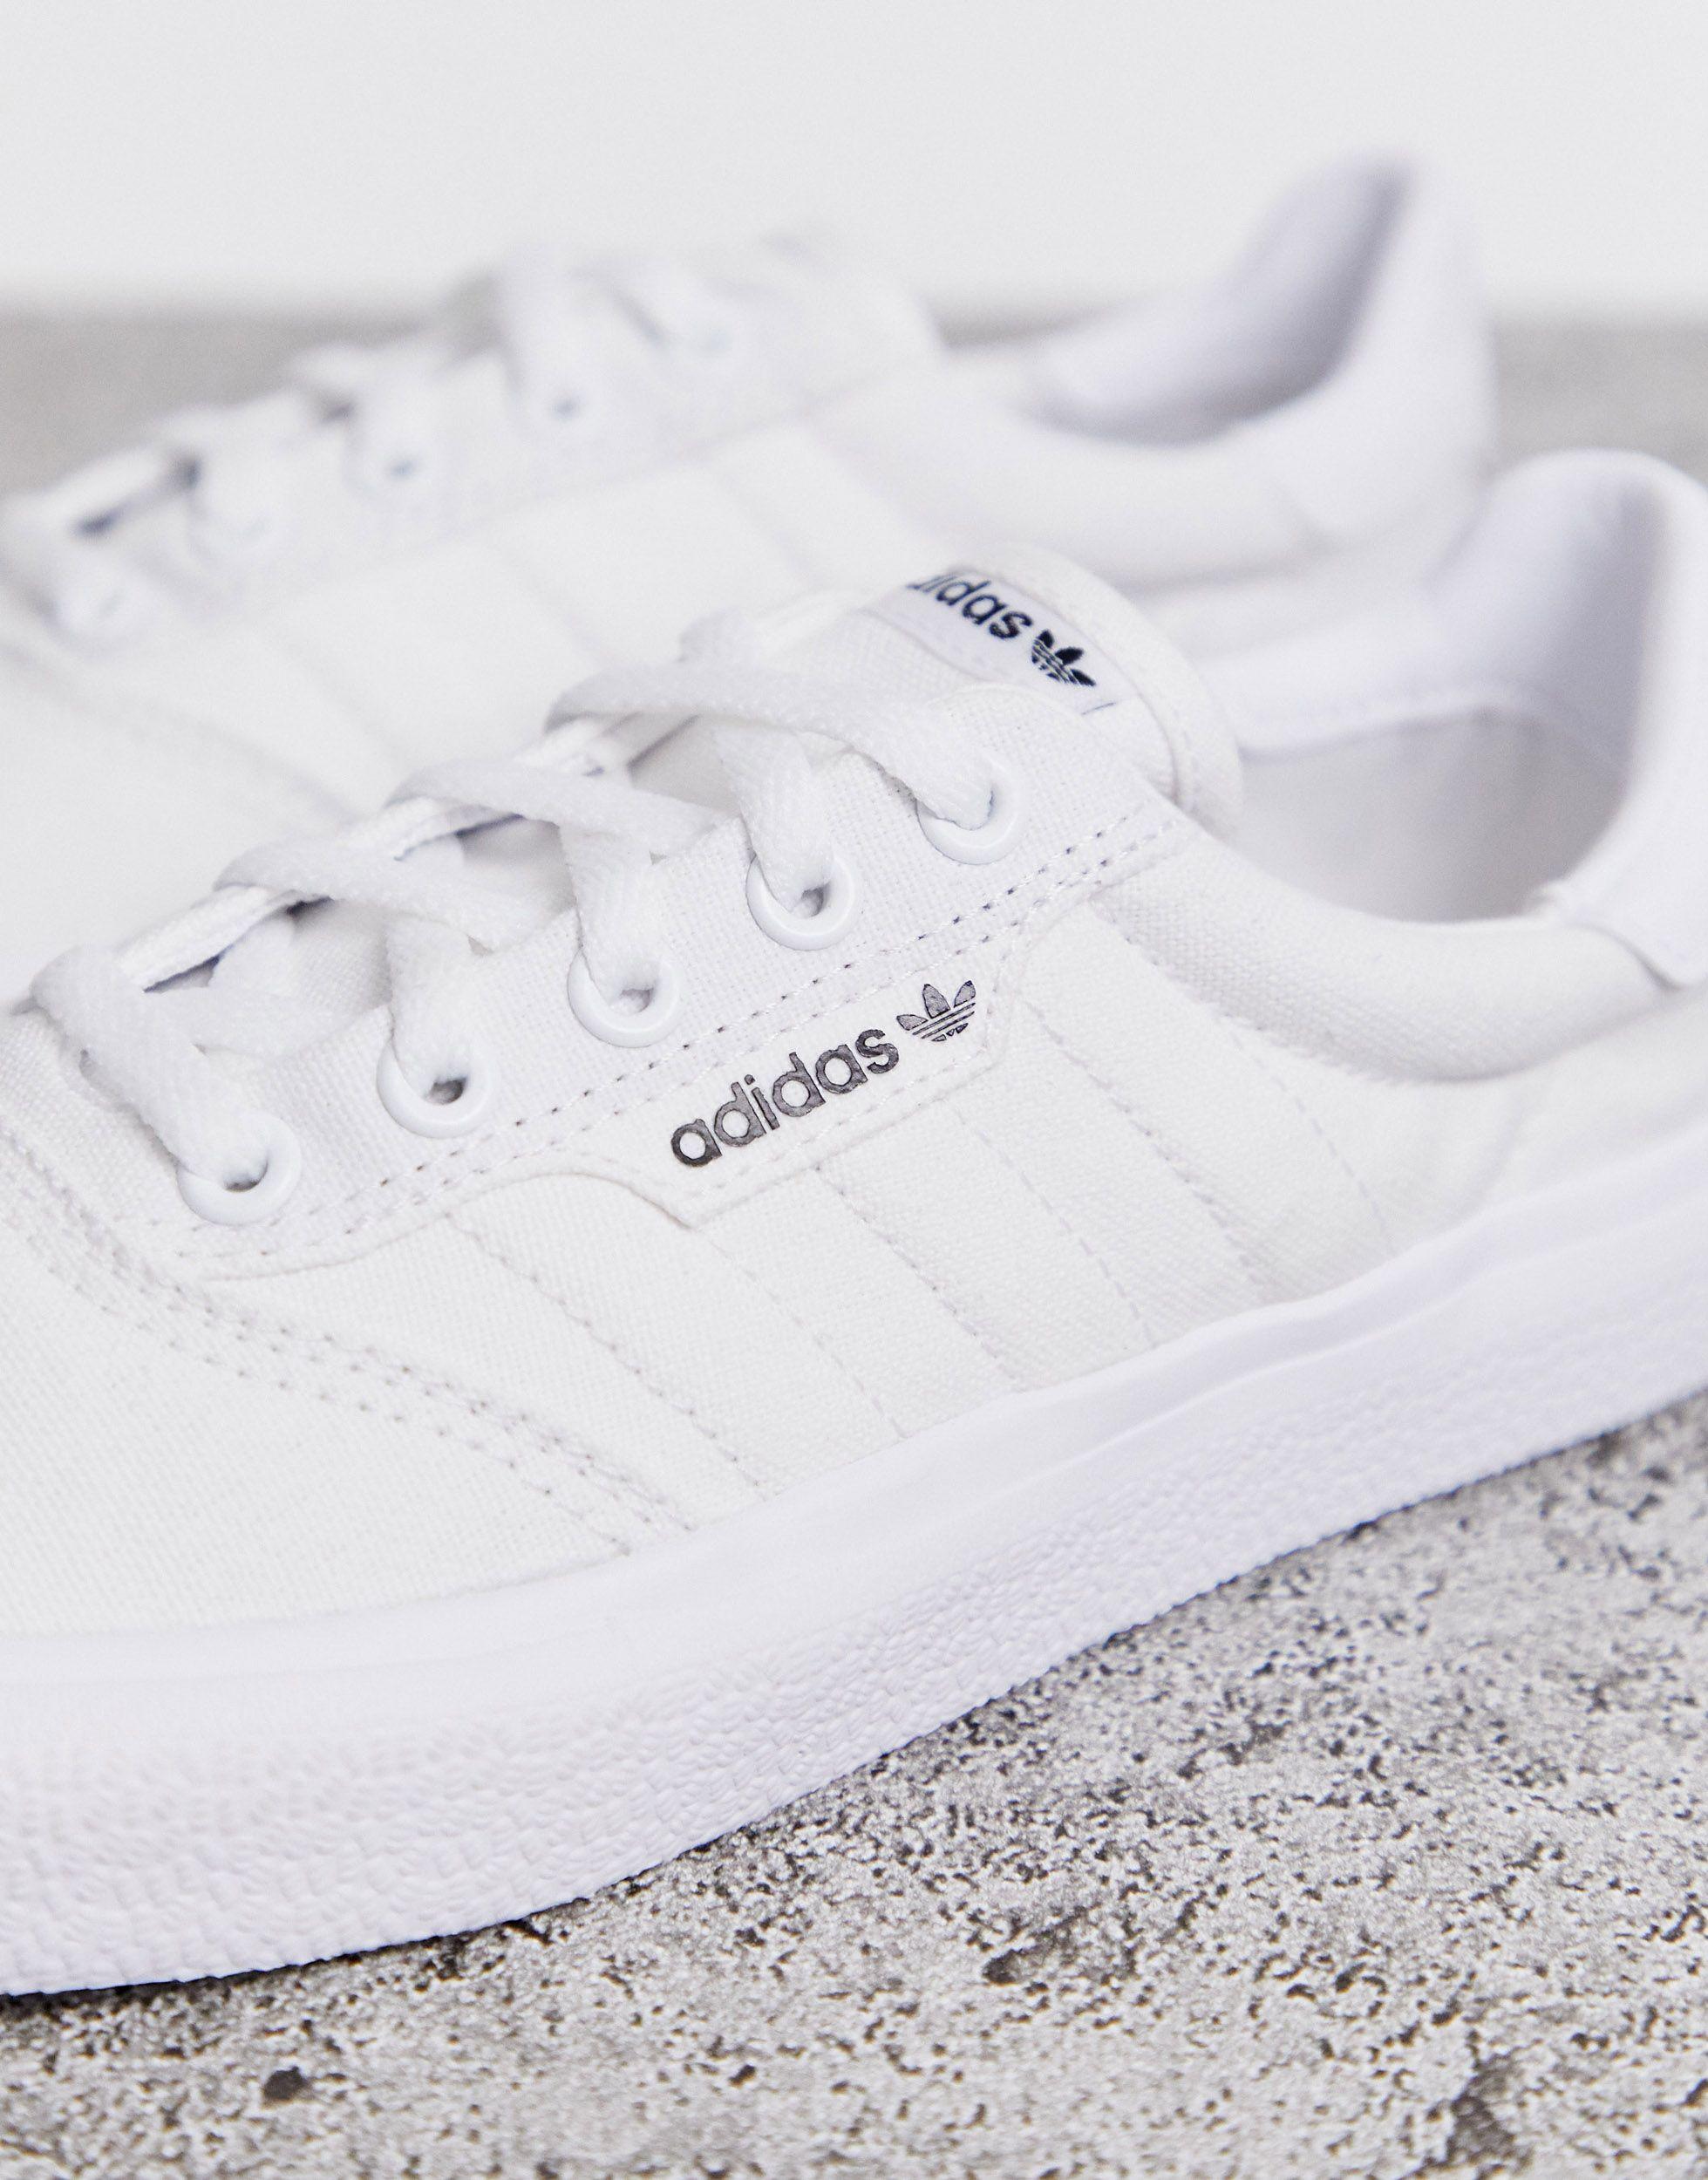 adidas Originals Rubber 3mc Trainers in White for Men - Save 71% - Lyst